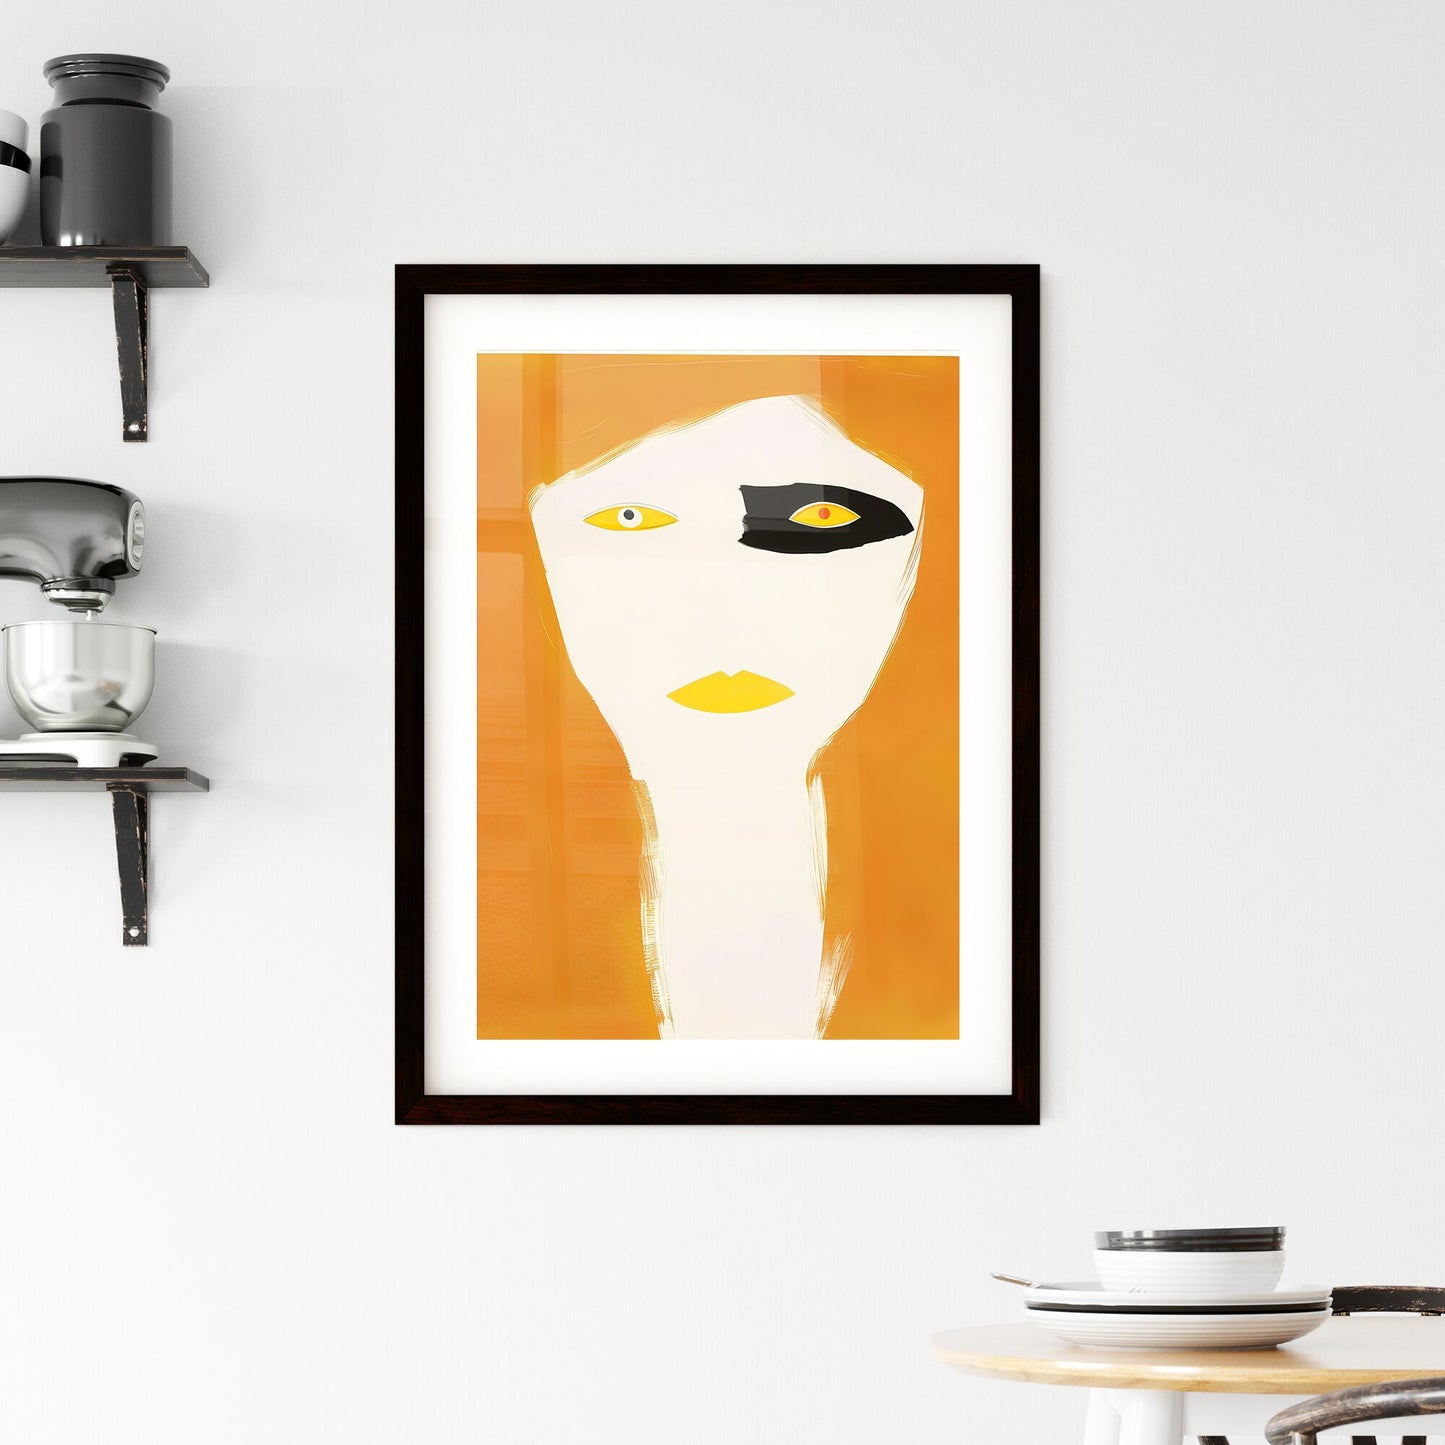 Minimalist Art Poster: Vibrant Painting of Woman with Yellow and Black Eyes, Art Fauvism, Wall Decor, Abstract Art Default Title